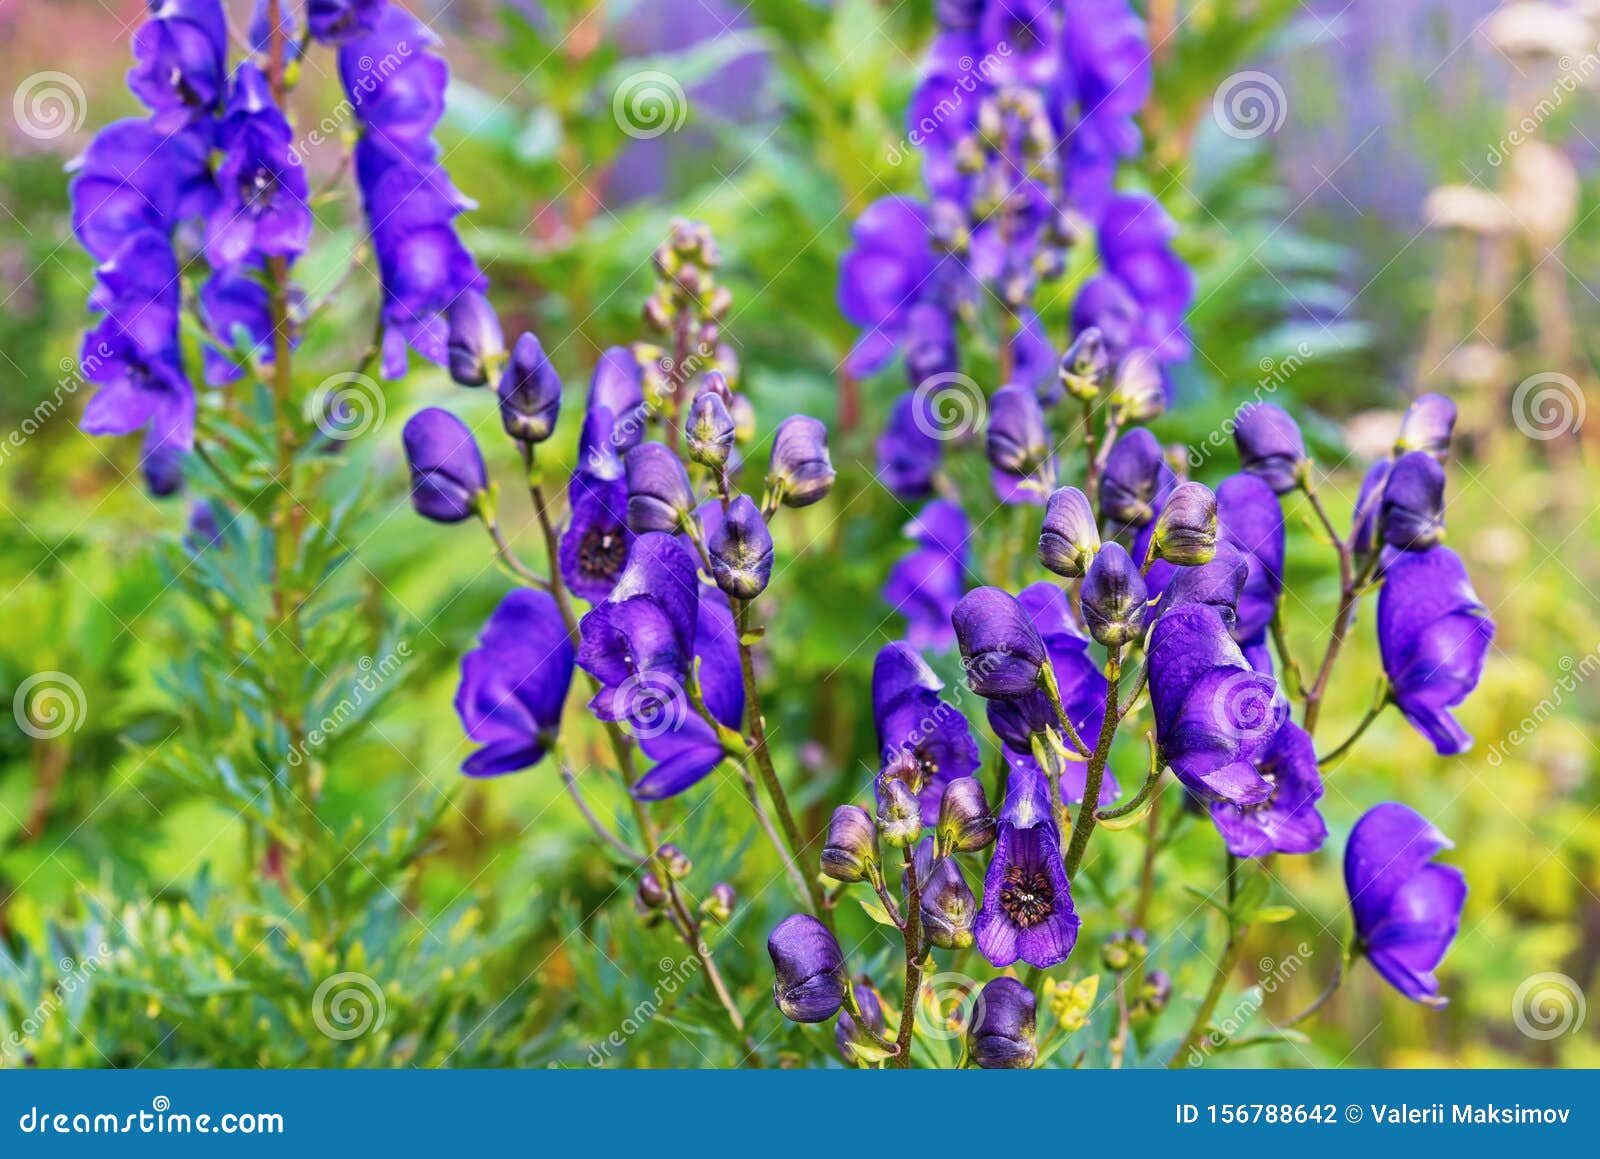 Aconite Flower Or Wolf Root Is A Poisonous Plant Violet Flowers Stock Photo Image Of Aconitum Botanical 156788642